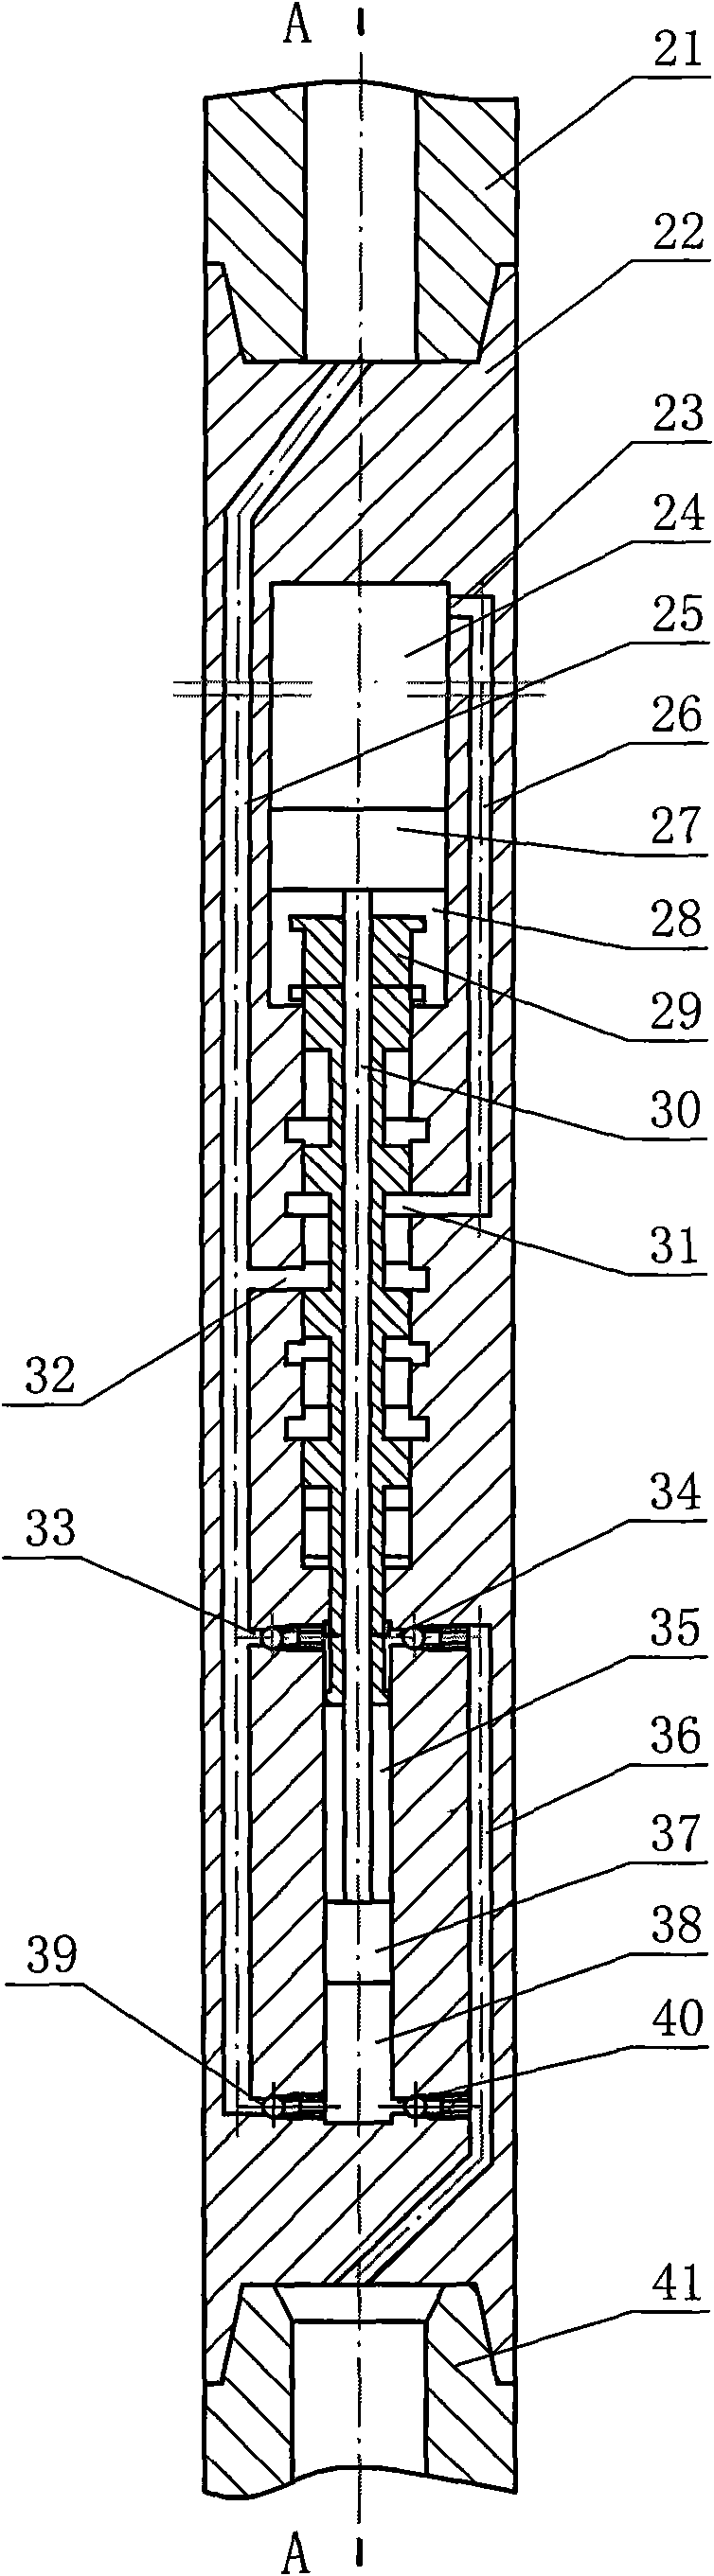 Process of reinforcing underground supercharged expansion pipe